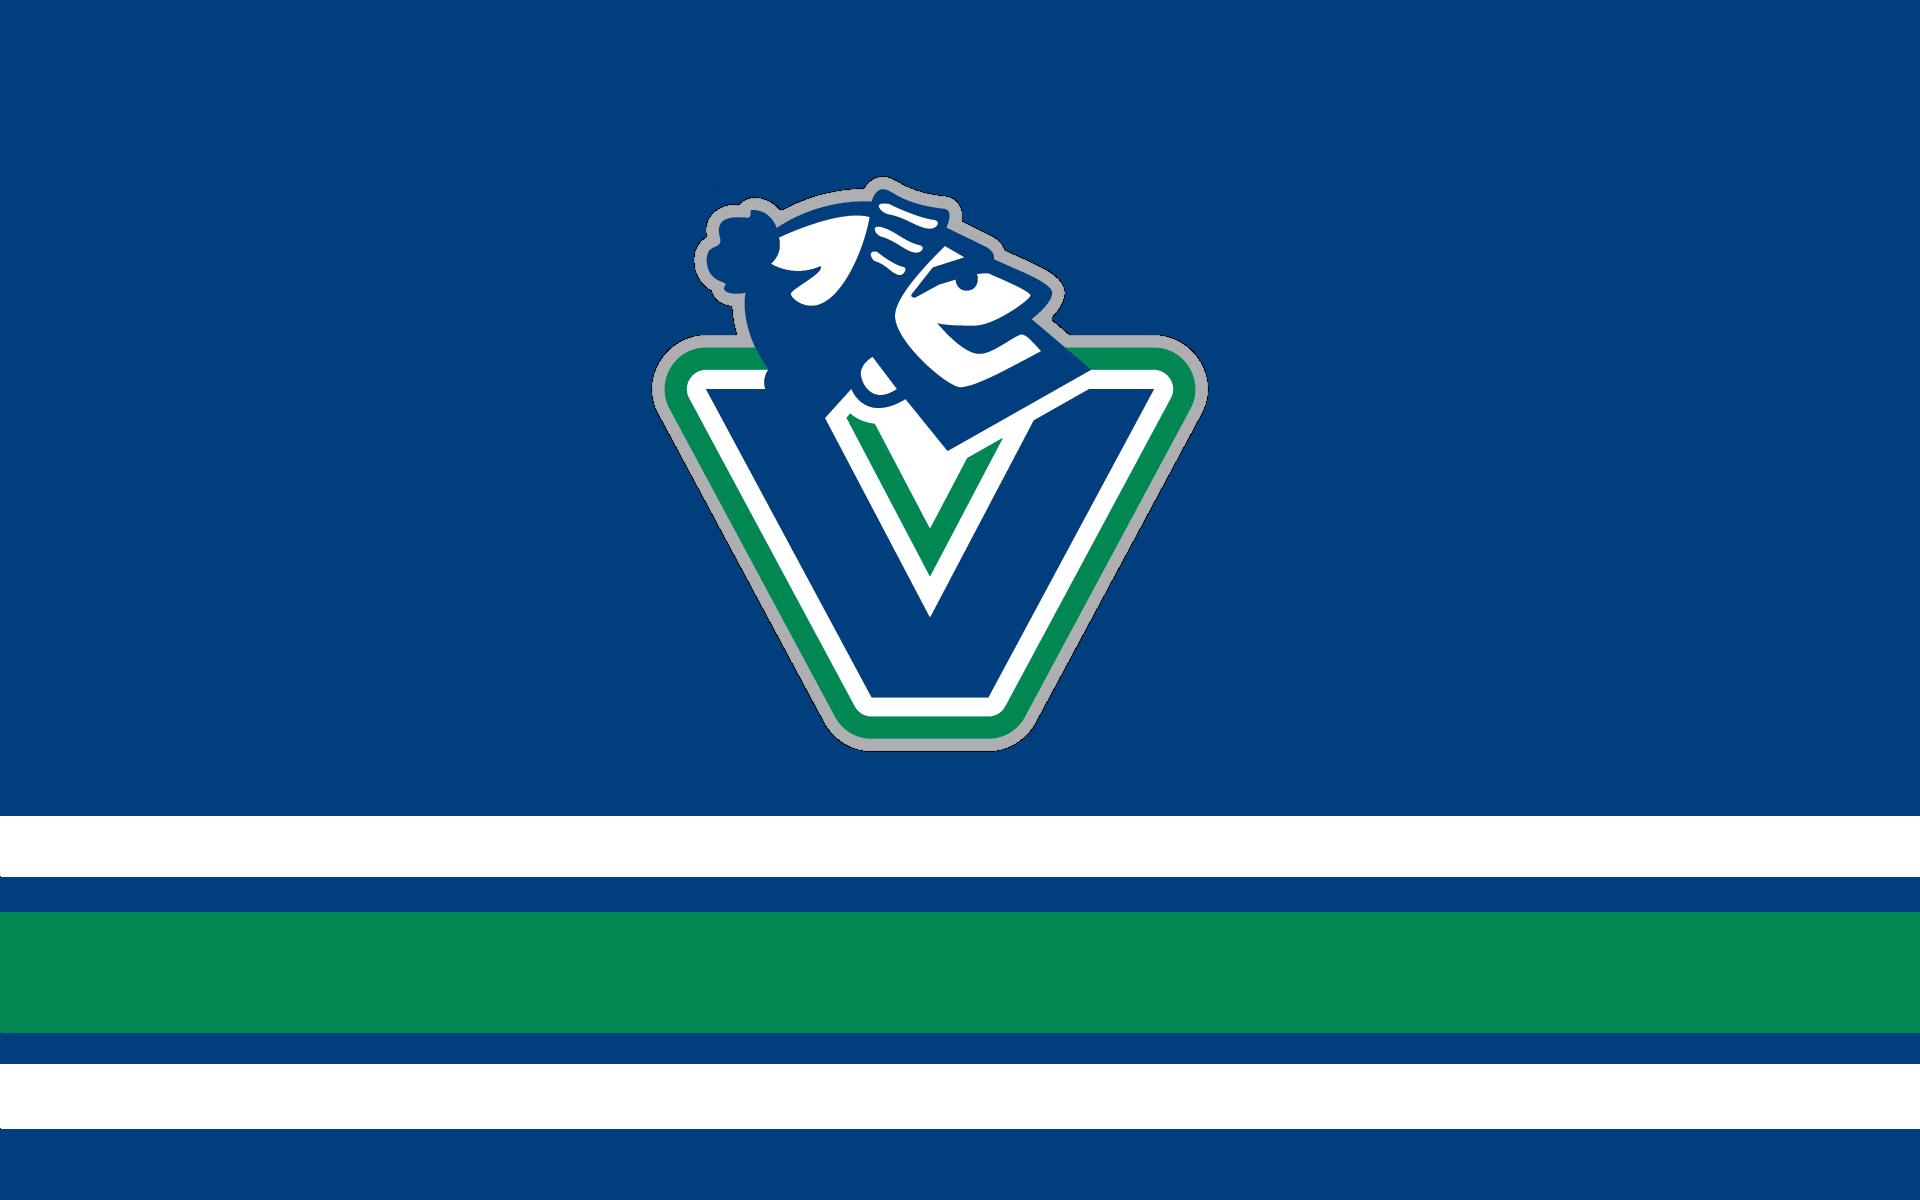 Vancouver Johnny Canucks By Tomstrong